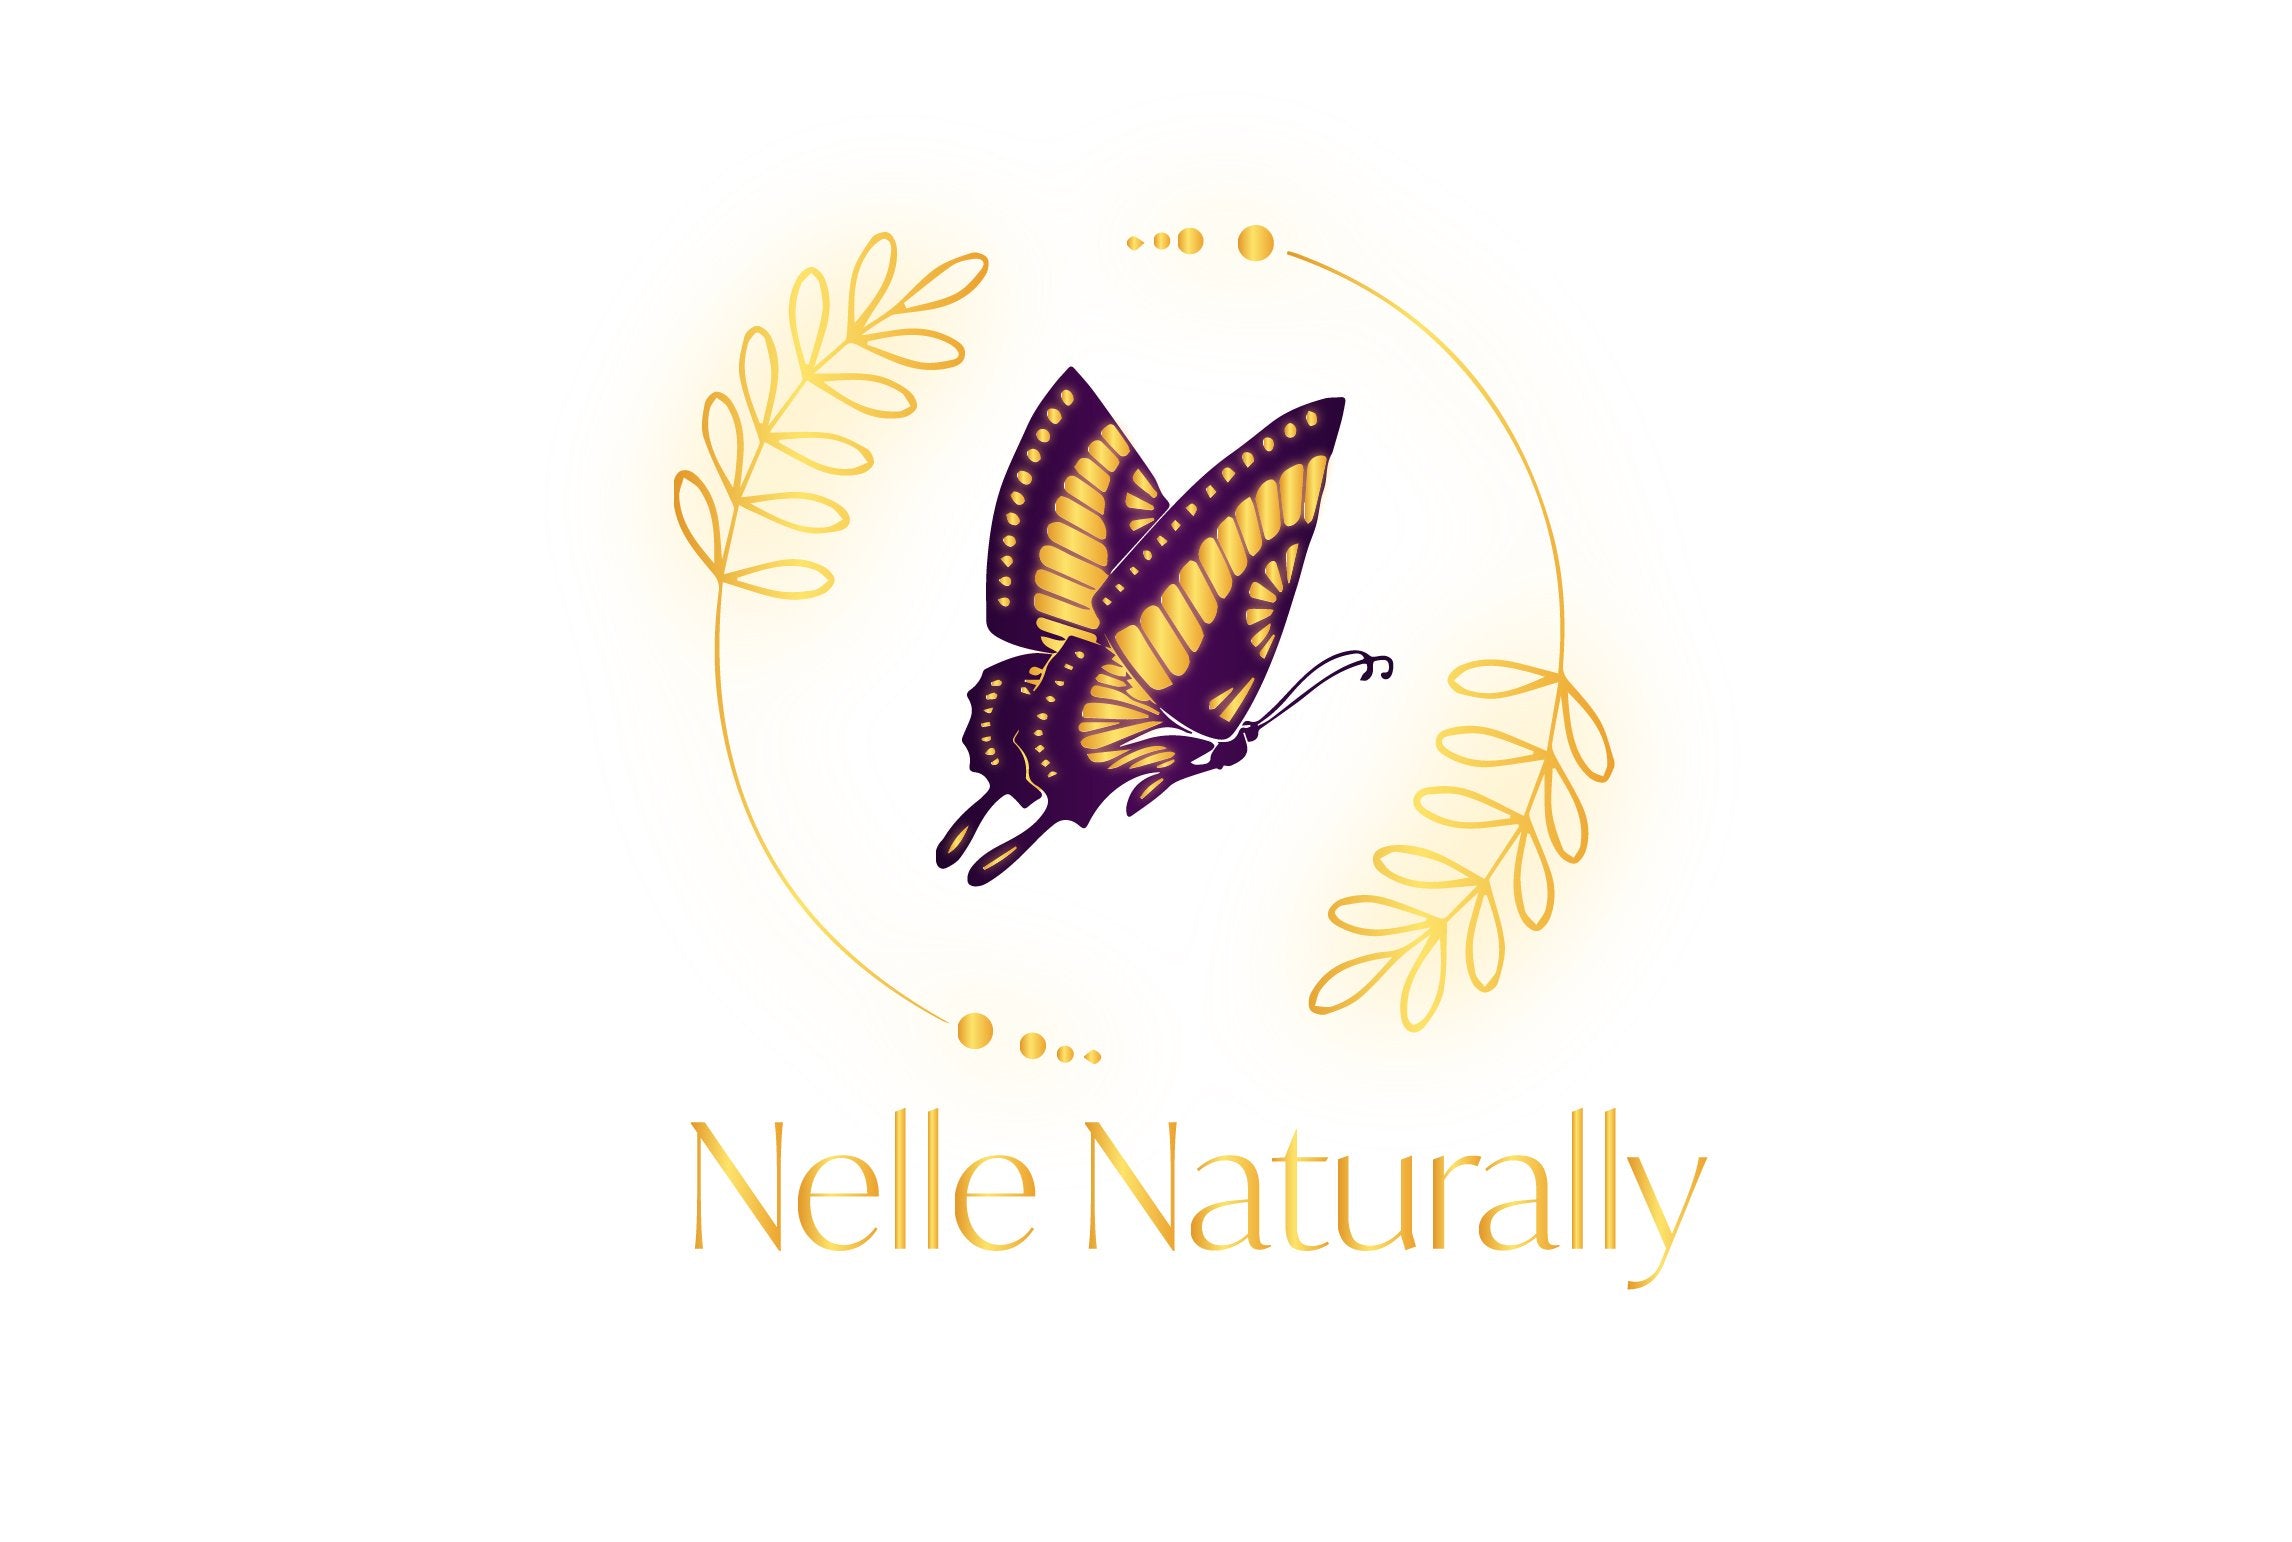 Nelle Naturally